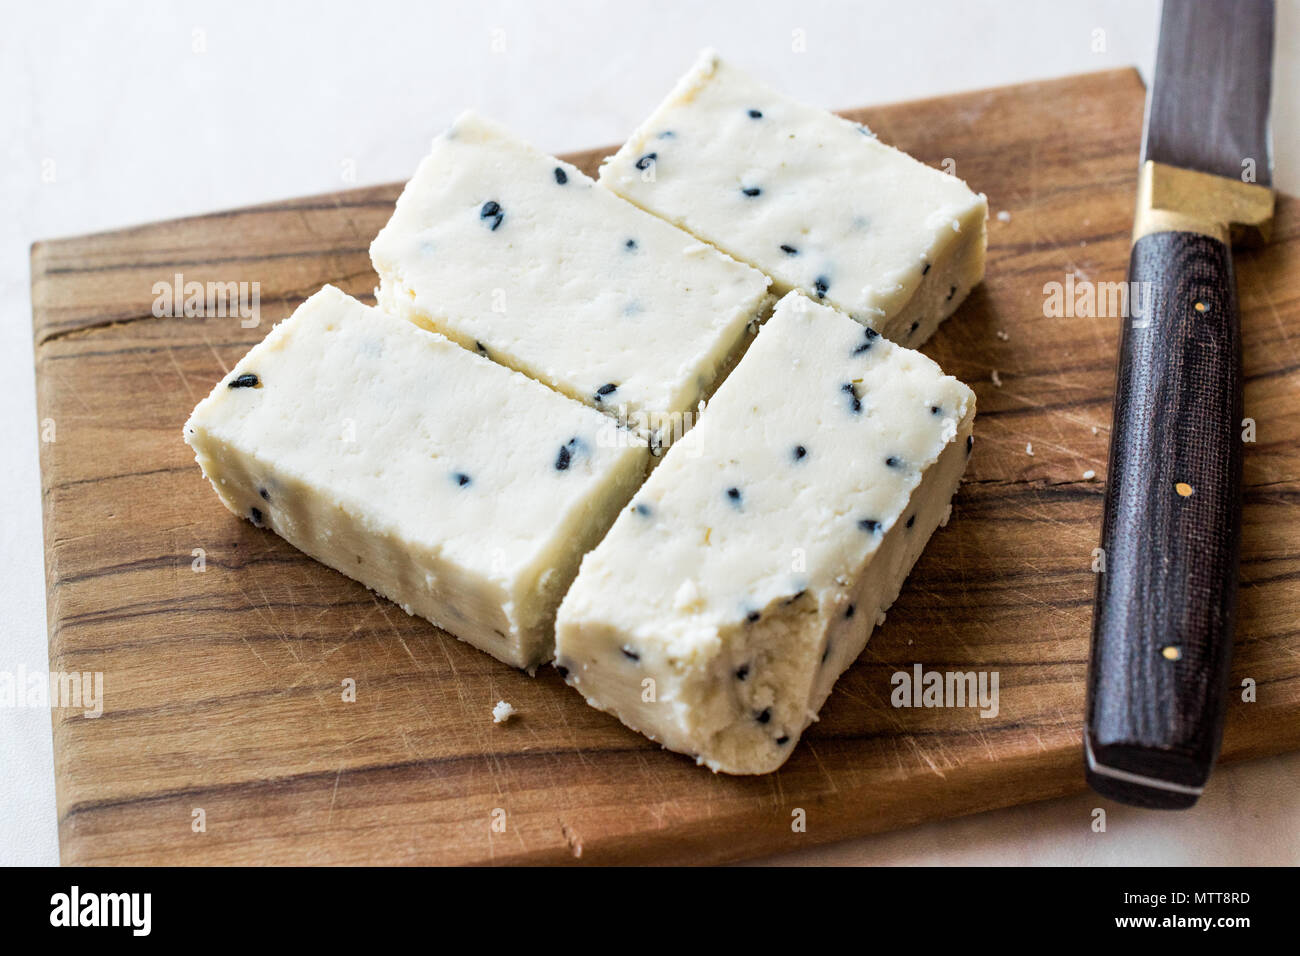 Turkish Feta Cheese with Black Cumin (Sesame) Seeds on Wooden Surface with Knife. Traditional Organic Food. Stock Photo